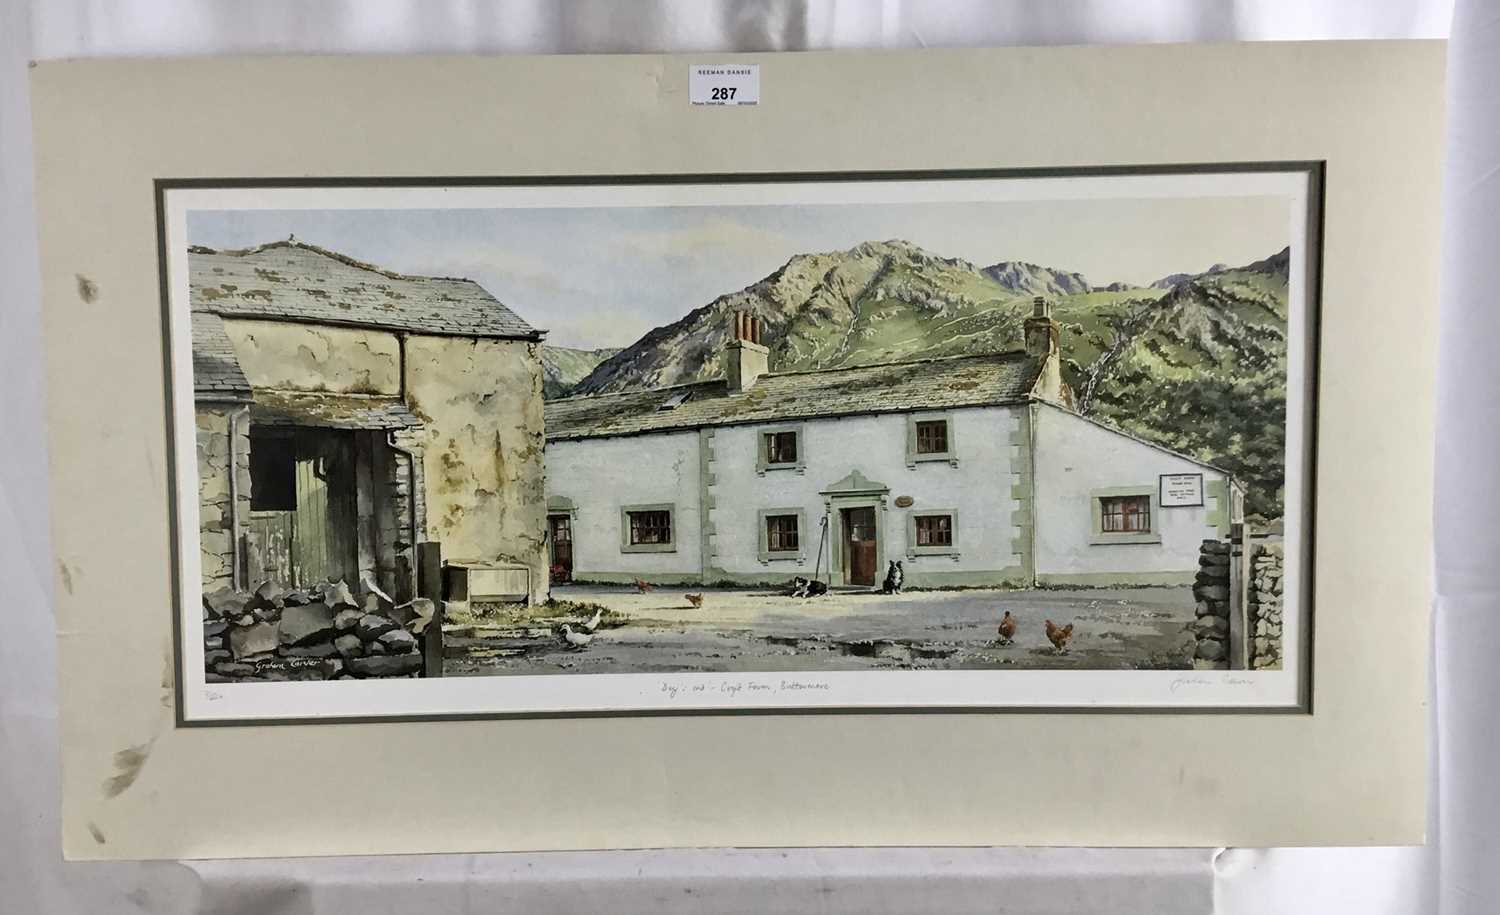 Graham Carver, two signed limited edition prints - Lake District Farms, from editions of 375 and 450